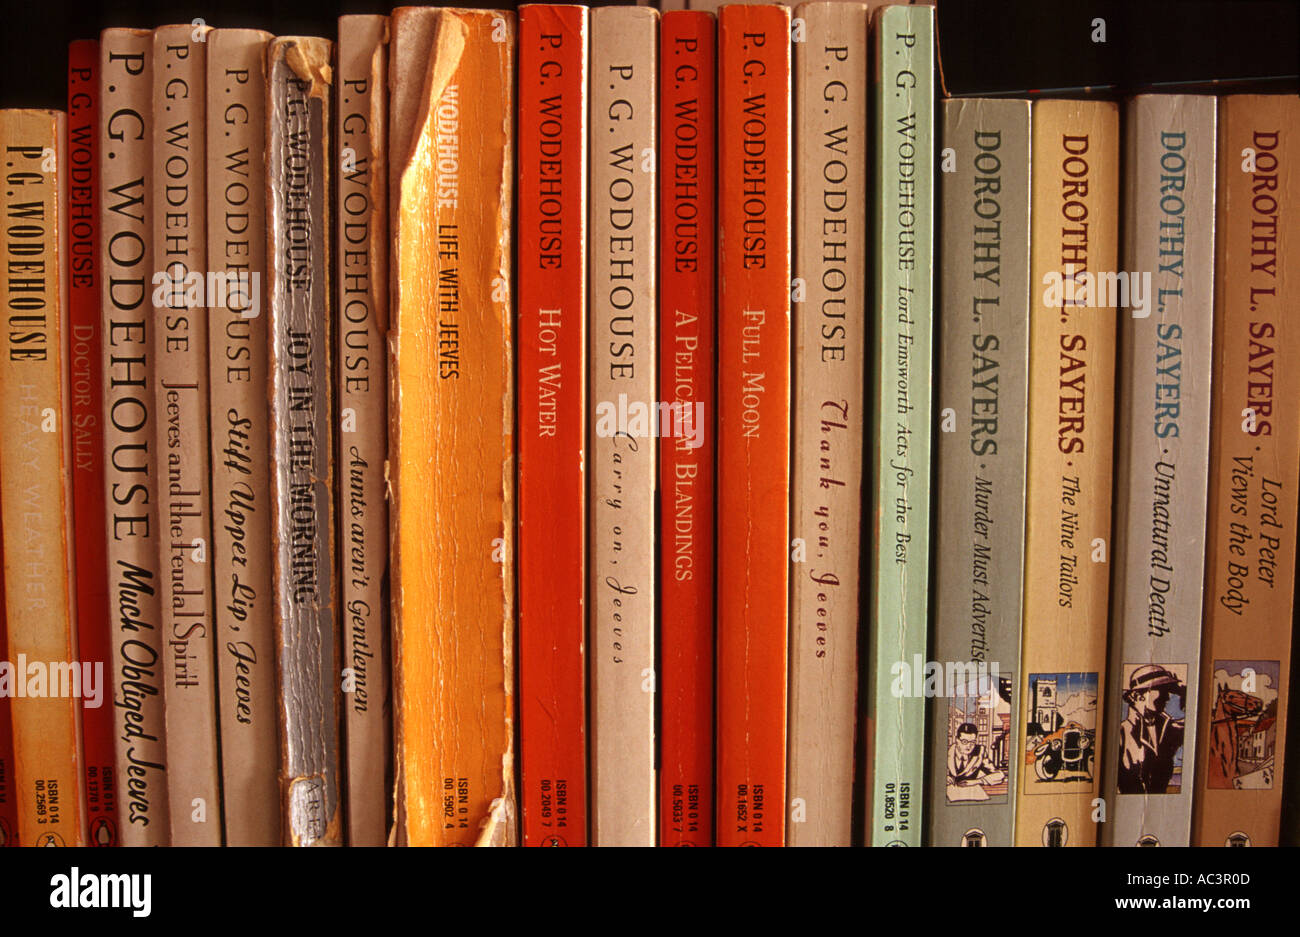 Novels by PG Wodehouse and Dorothy L Sayers Stock Photo